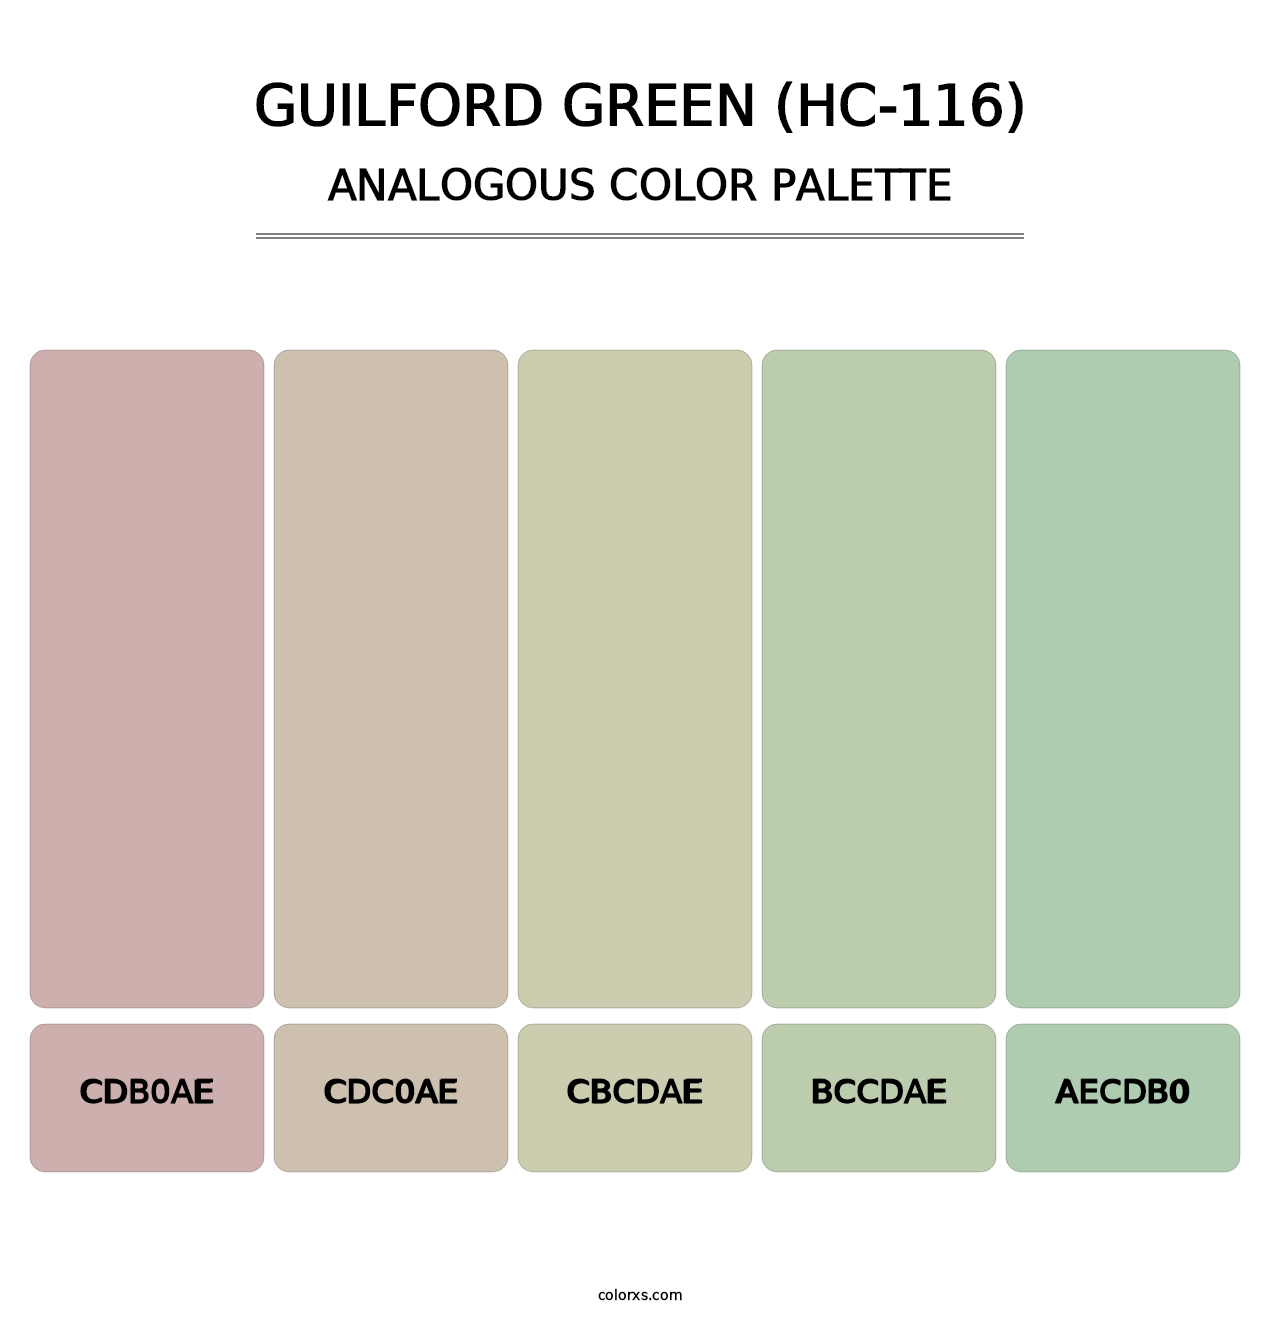 Guilford Green (HC-116) - Analogous Color Palette